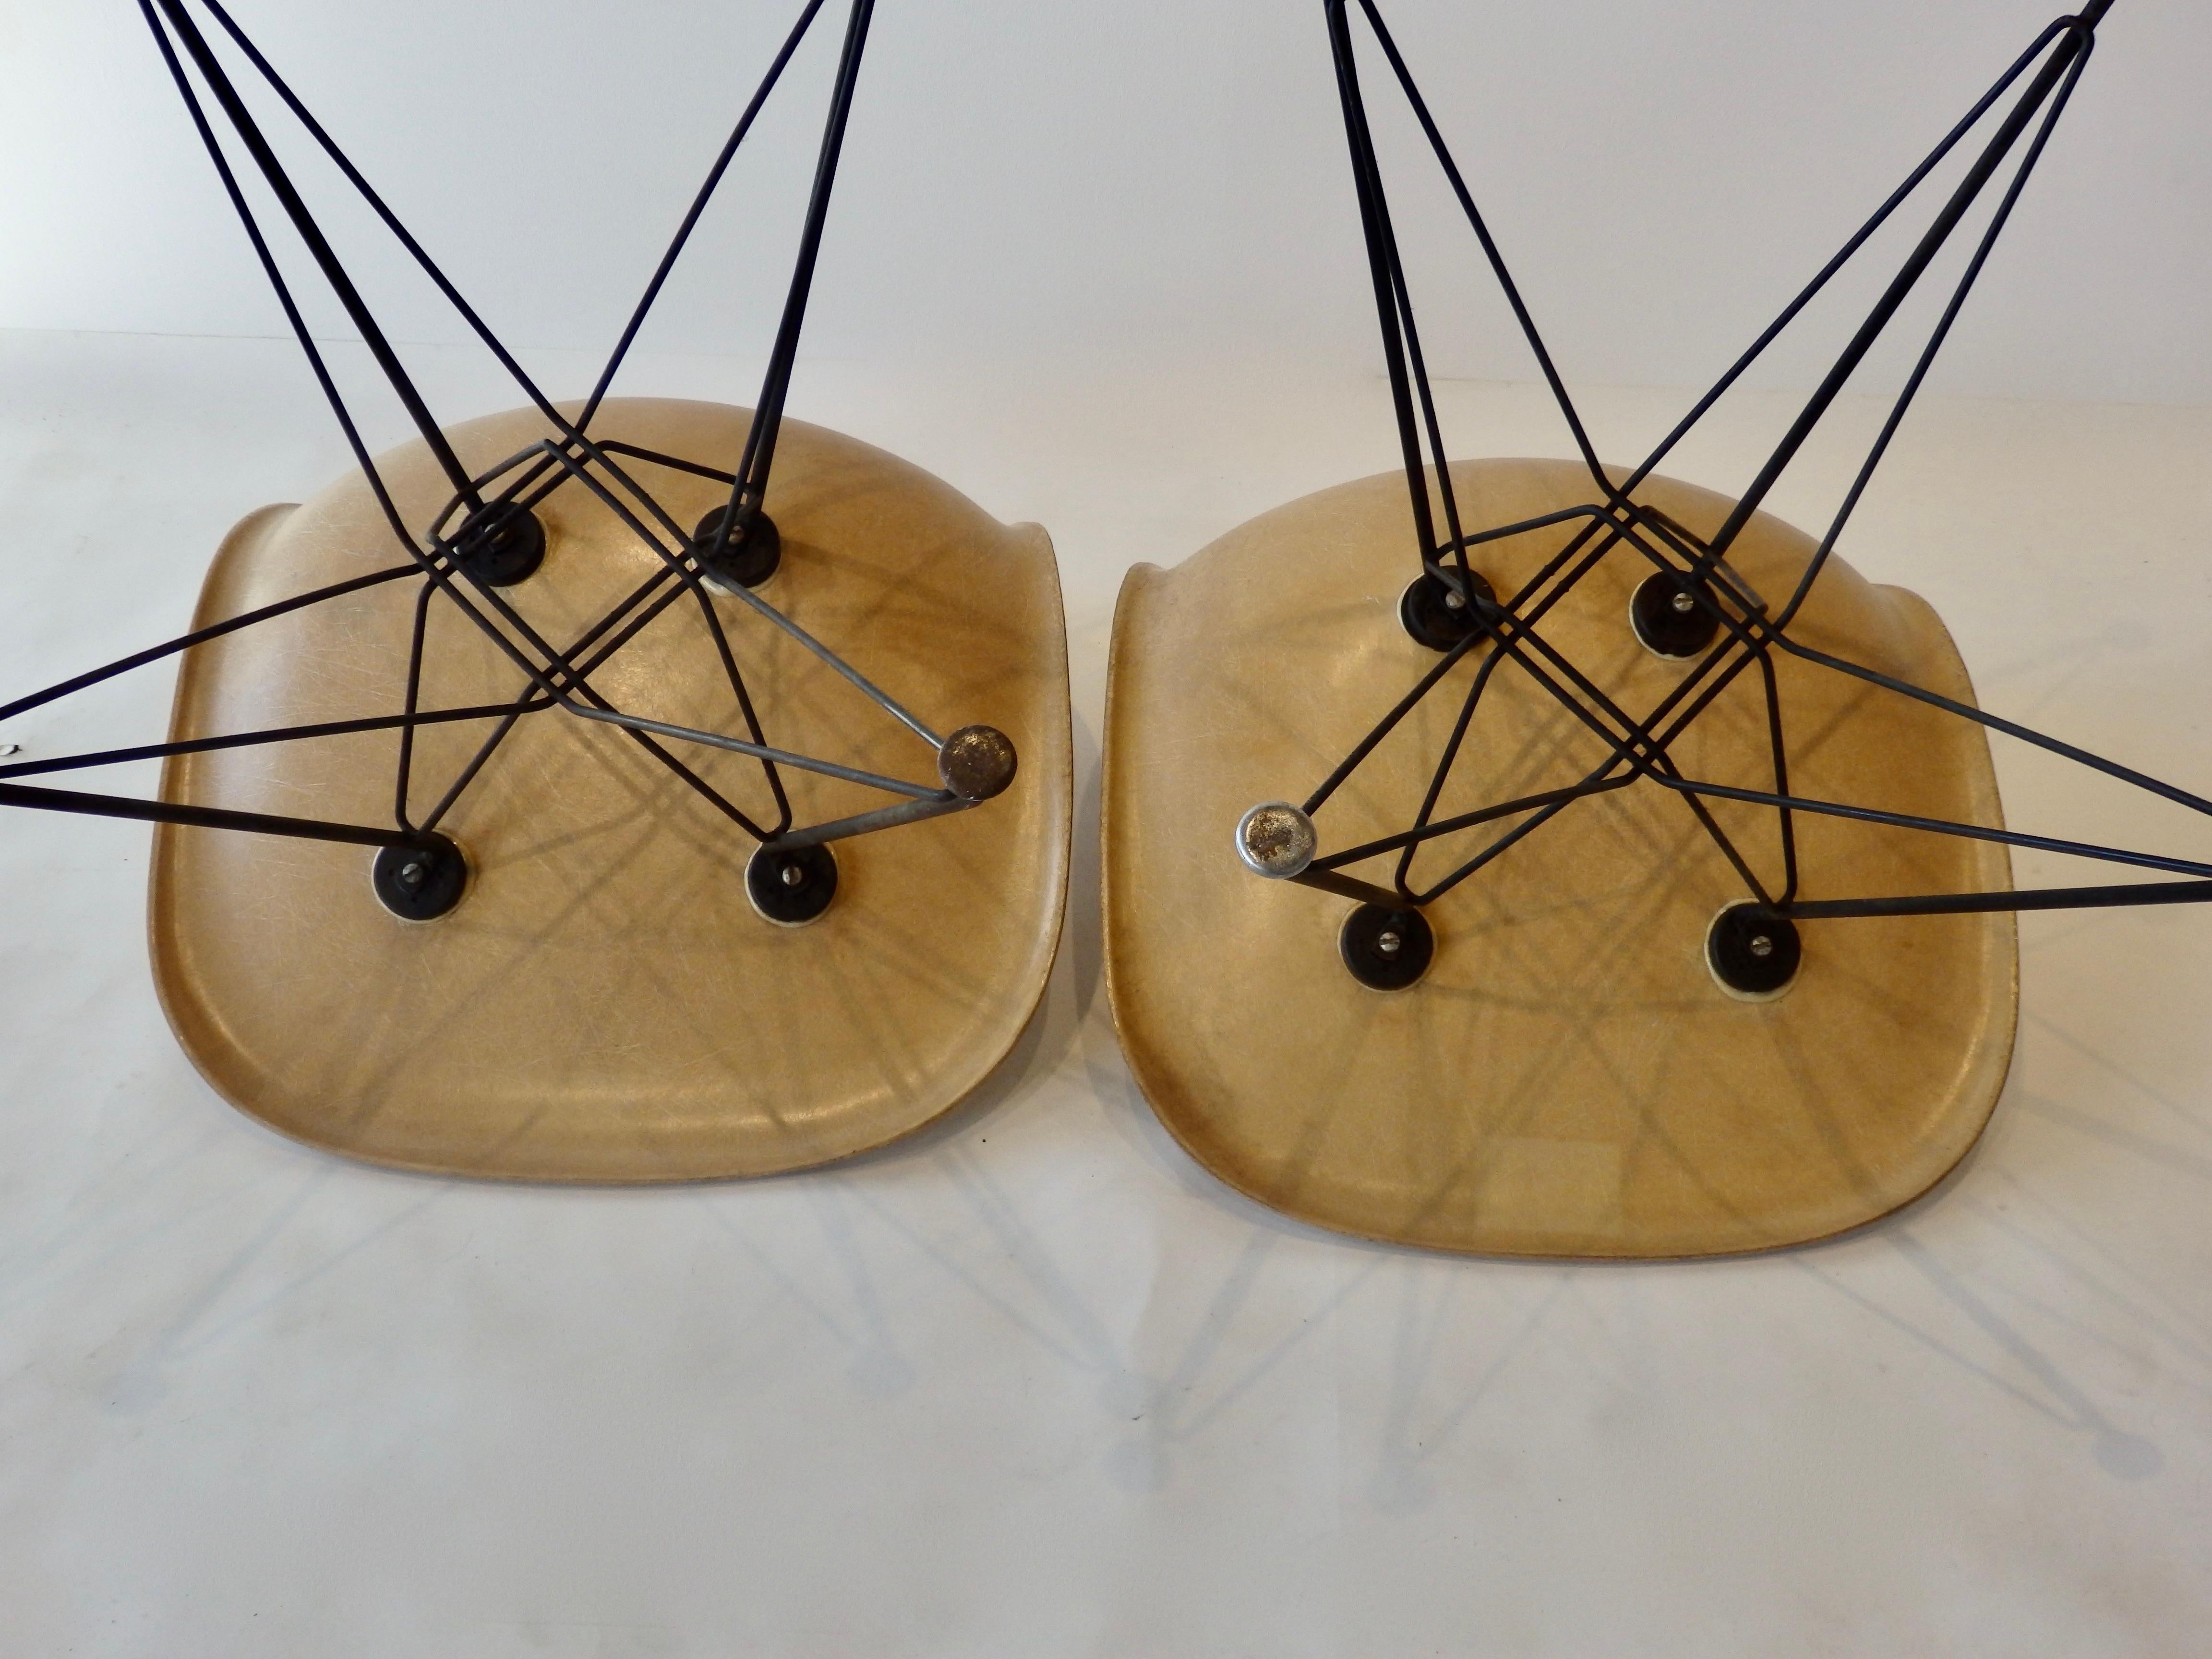 Mid-Century Modern Pair of Eames Fiberglass DSR Chairs on Eiffel Tower Bases For Sale